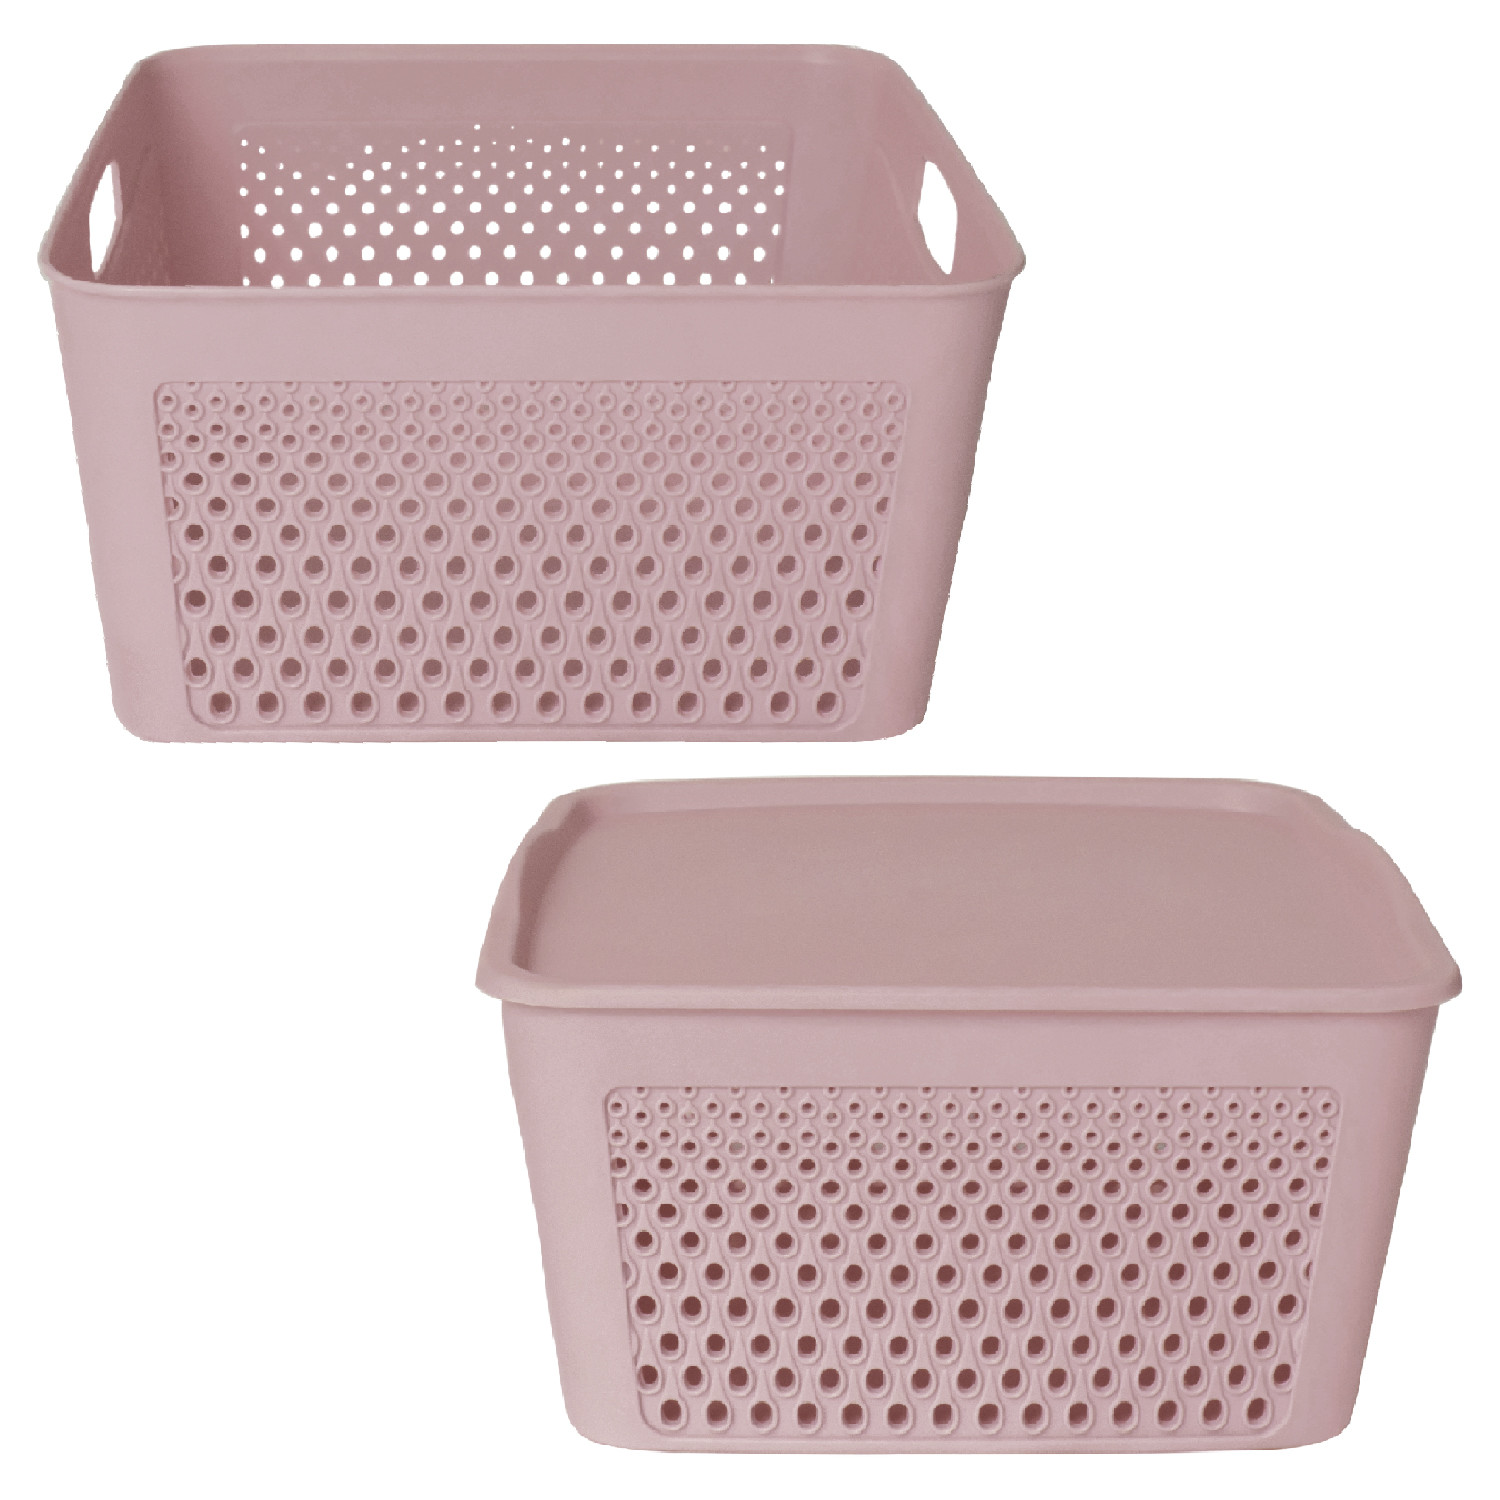 Kuber Industries Netted Design Unbreakable Multipurpose Square Shape Plastic Storage Baskets with lid Large Pack of 3 (Brown, Beige, Grey)